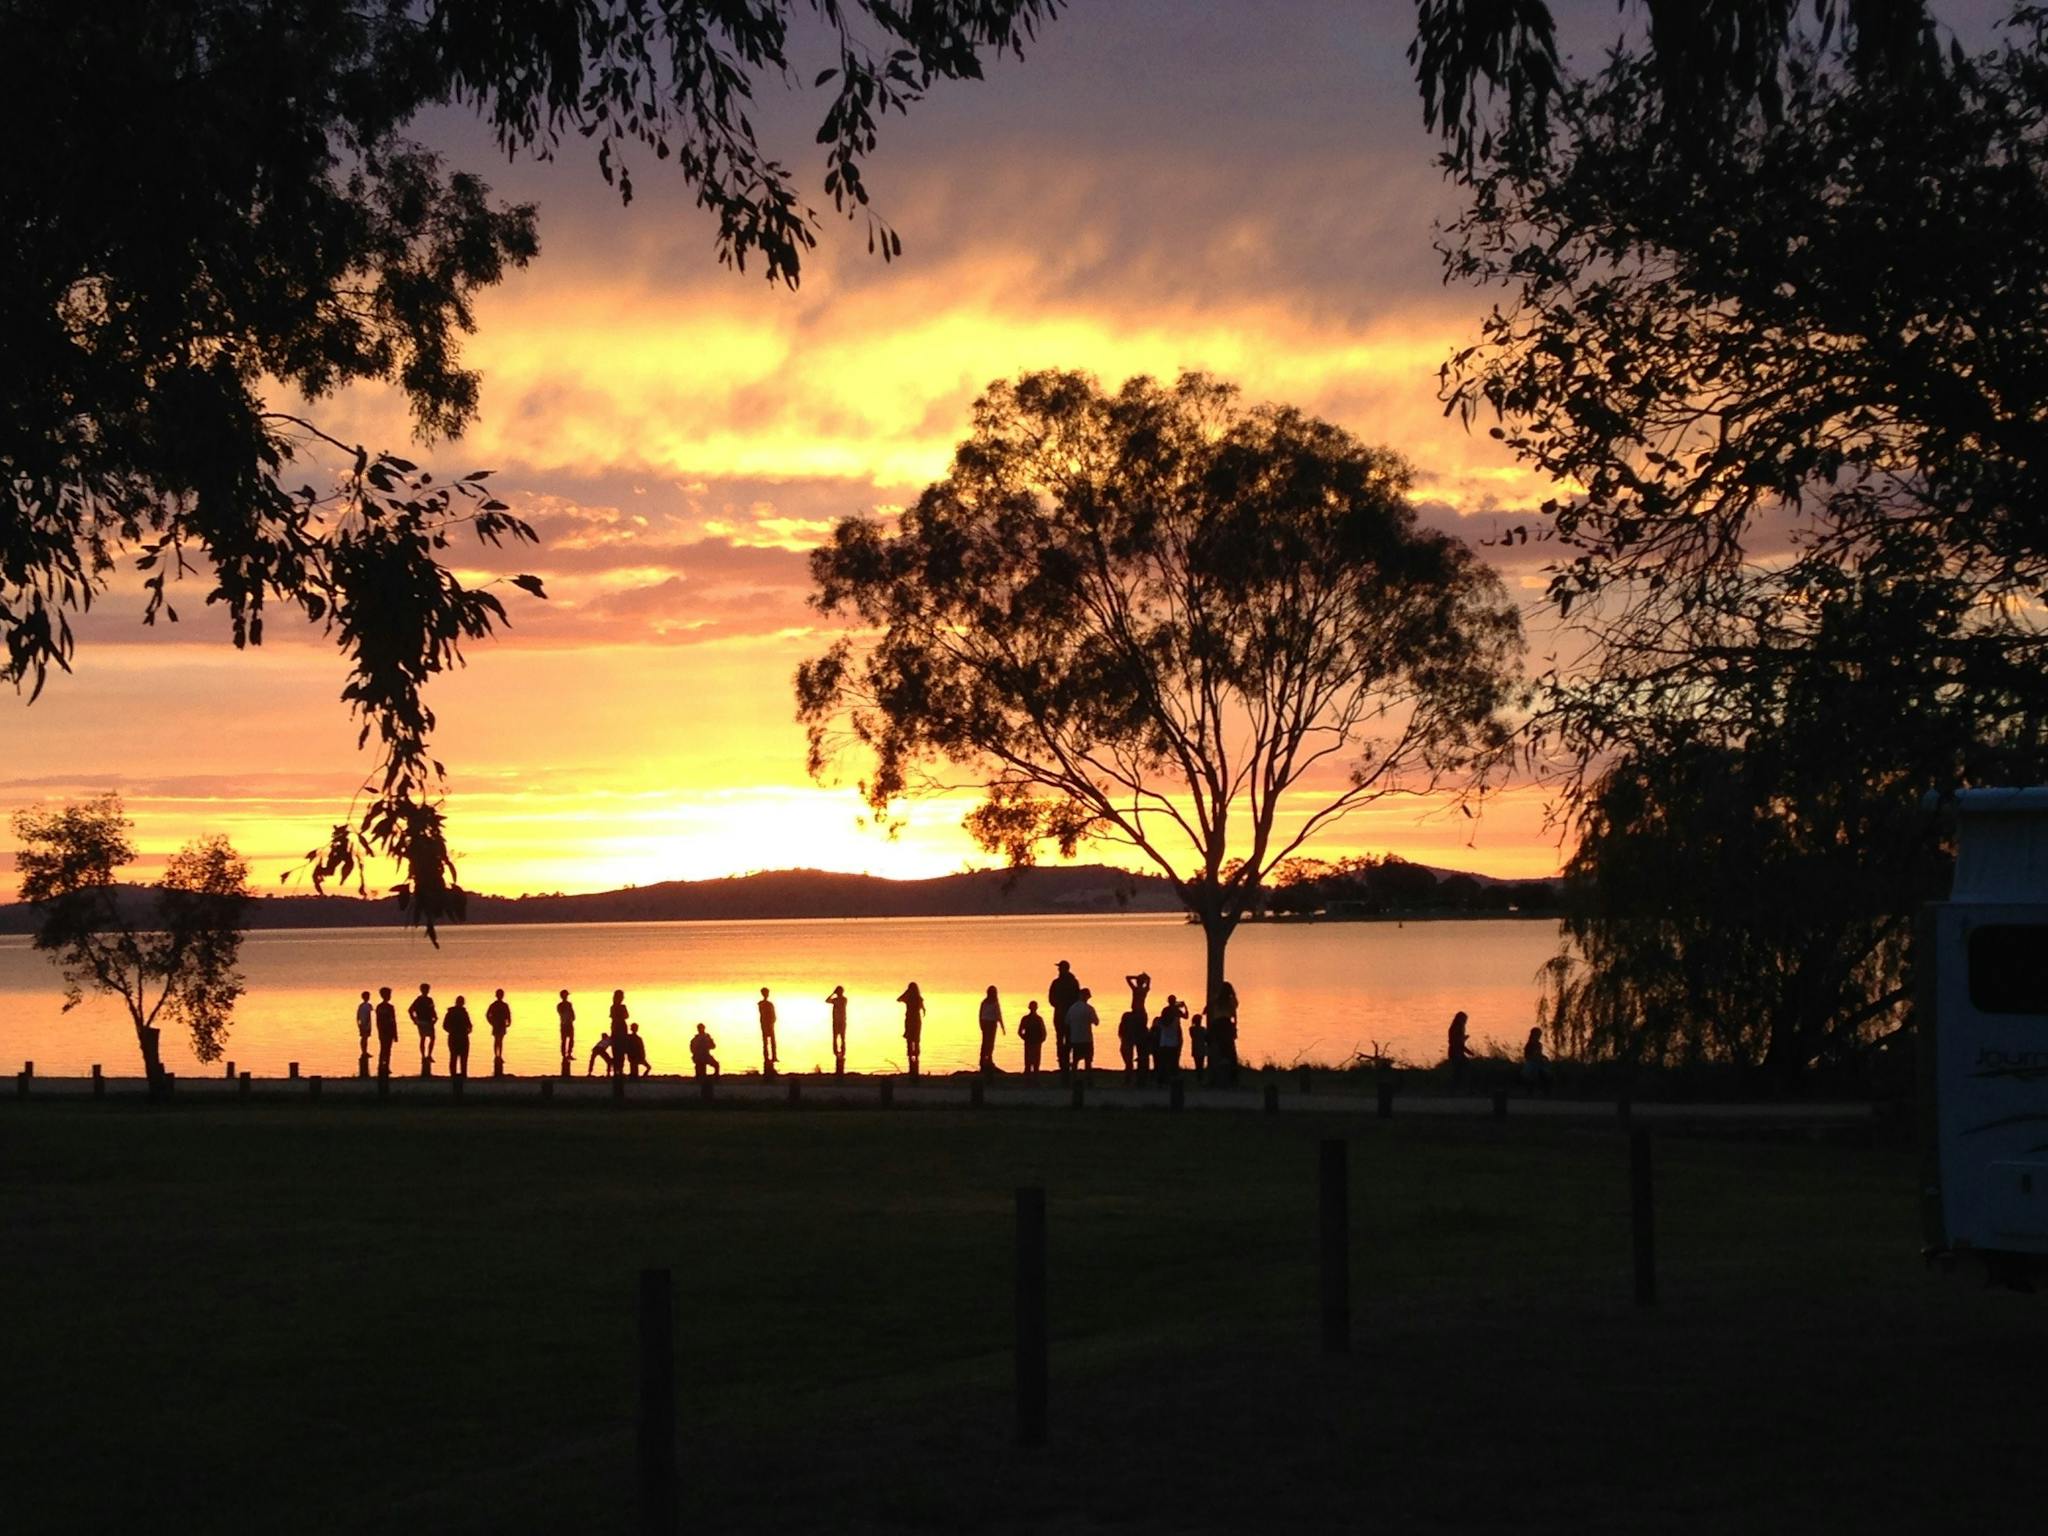 Just one of our many amazing sunsets over lake hume. Bring your cameras to capture the experience